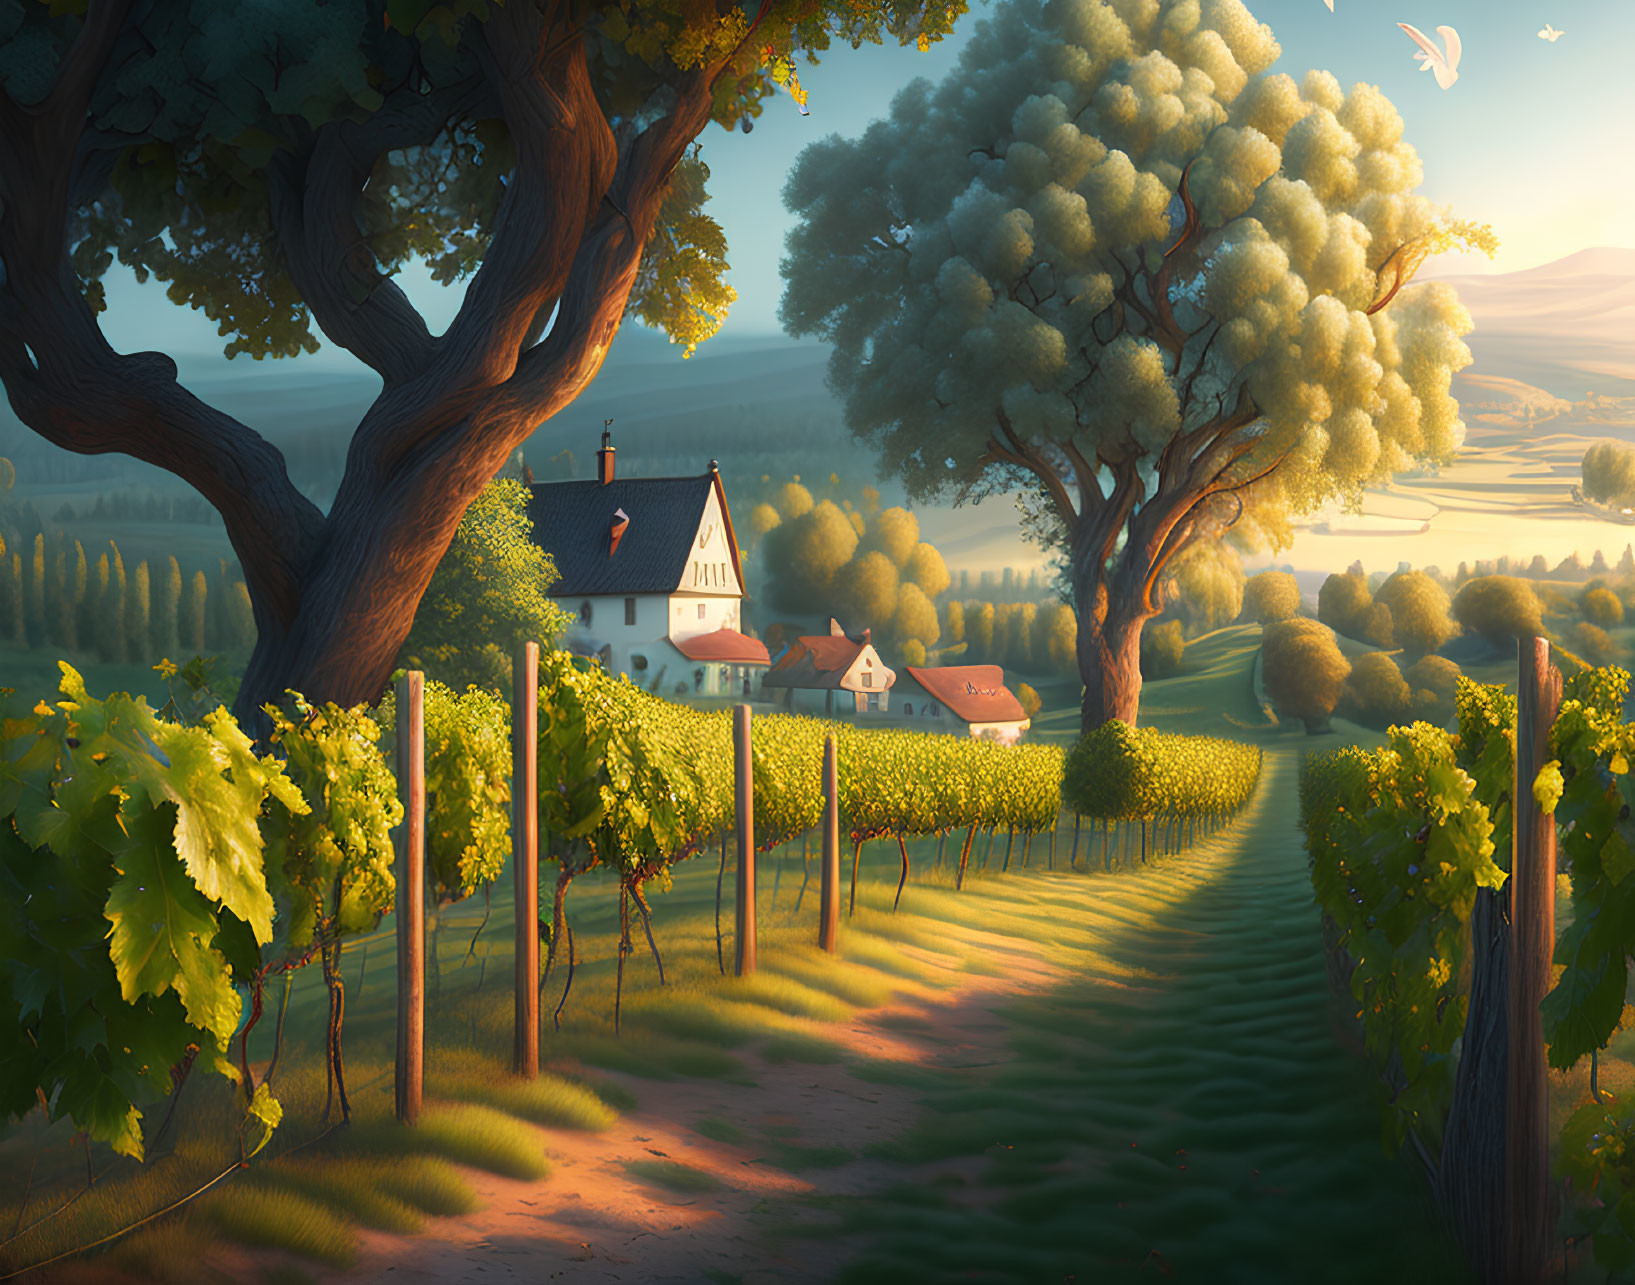 Tranquil vineyard scene with grapevines, white house, church, trees, and rolling